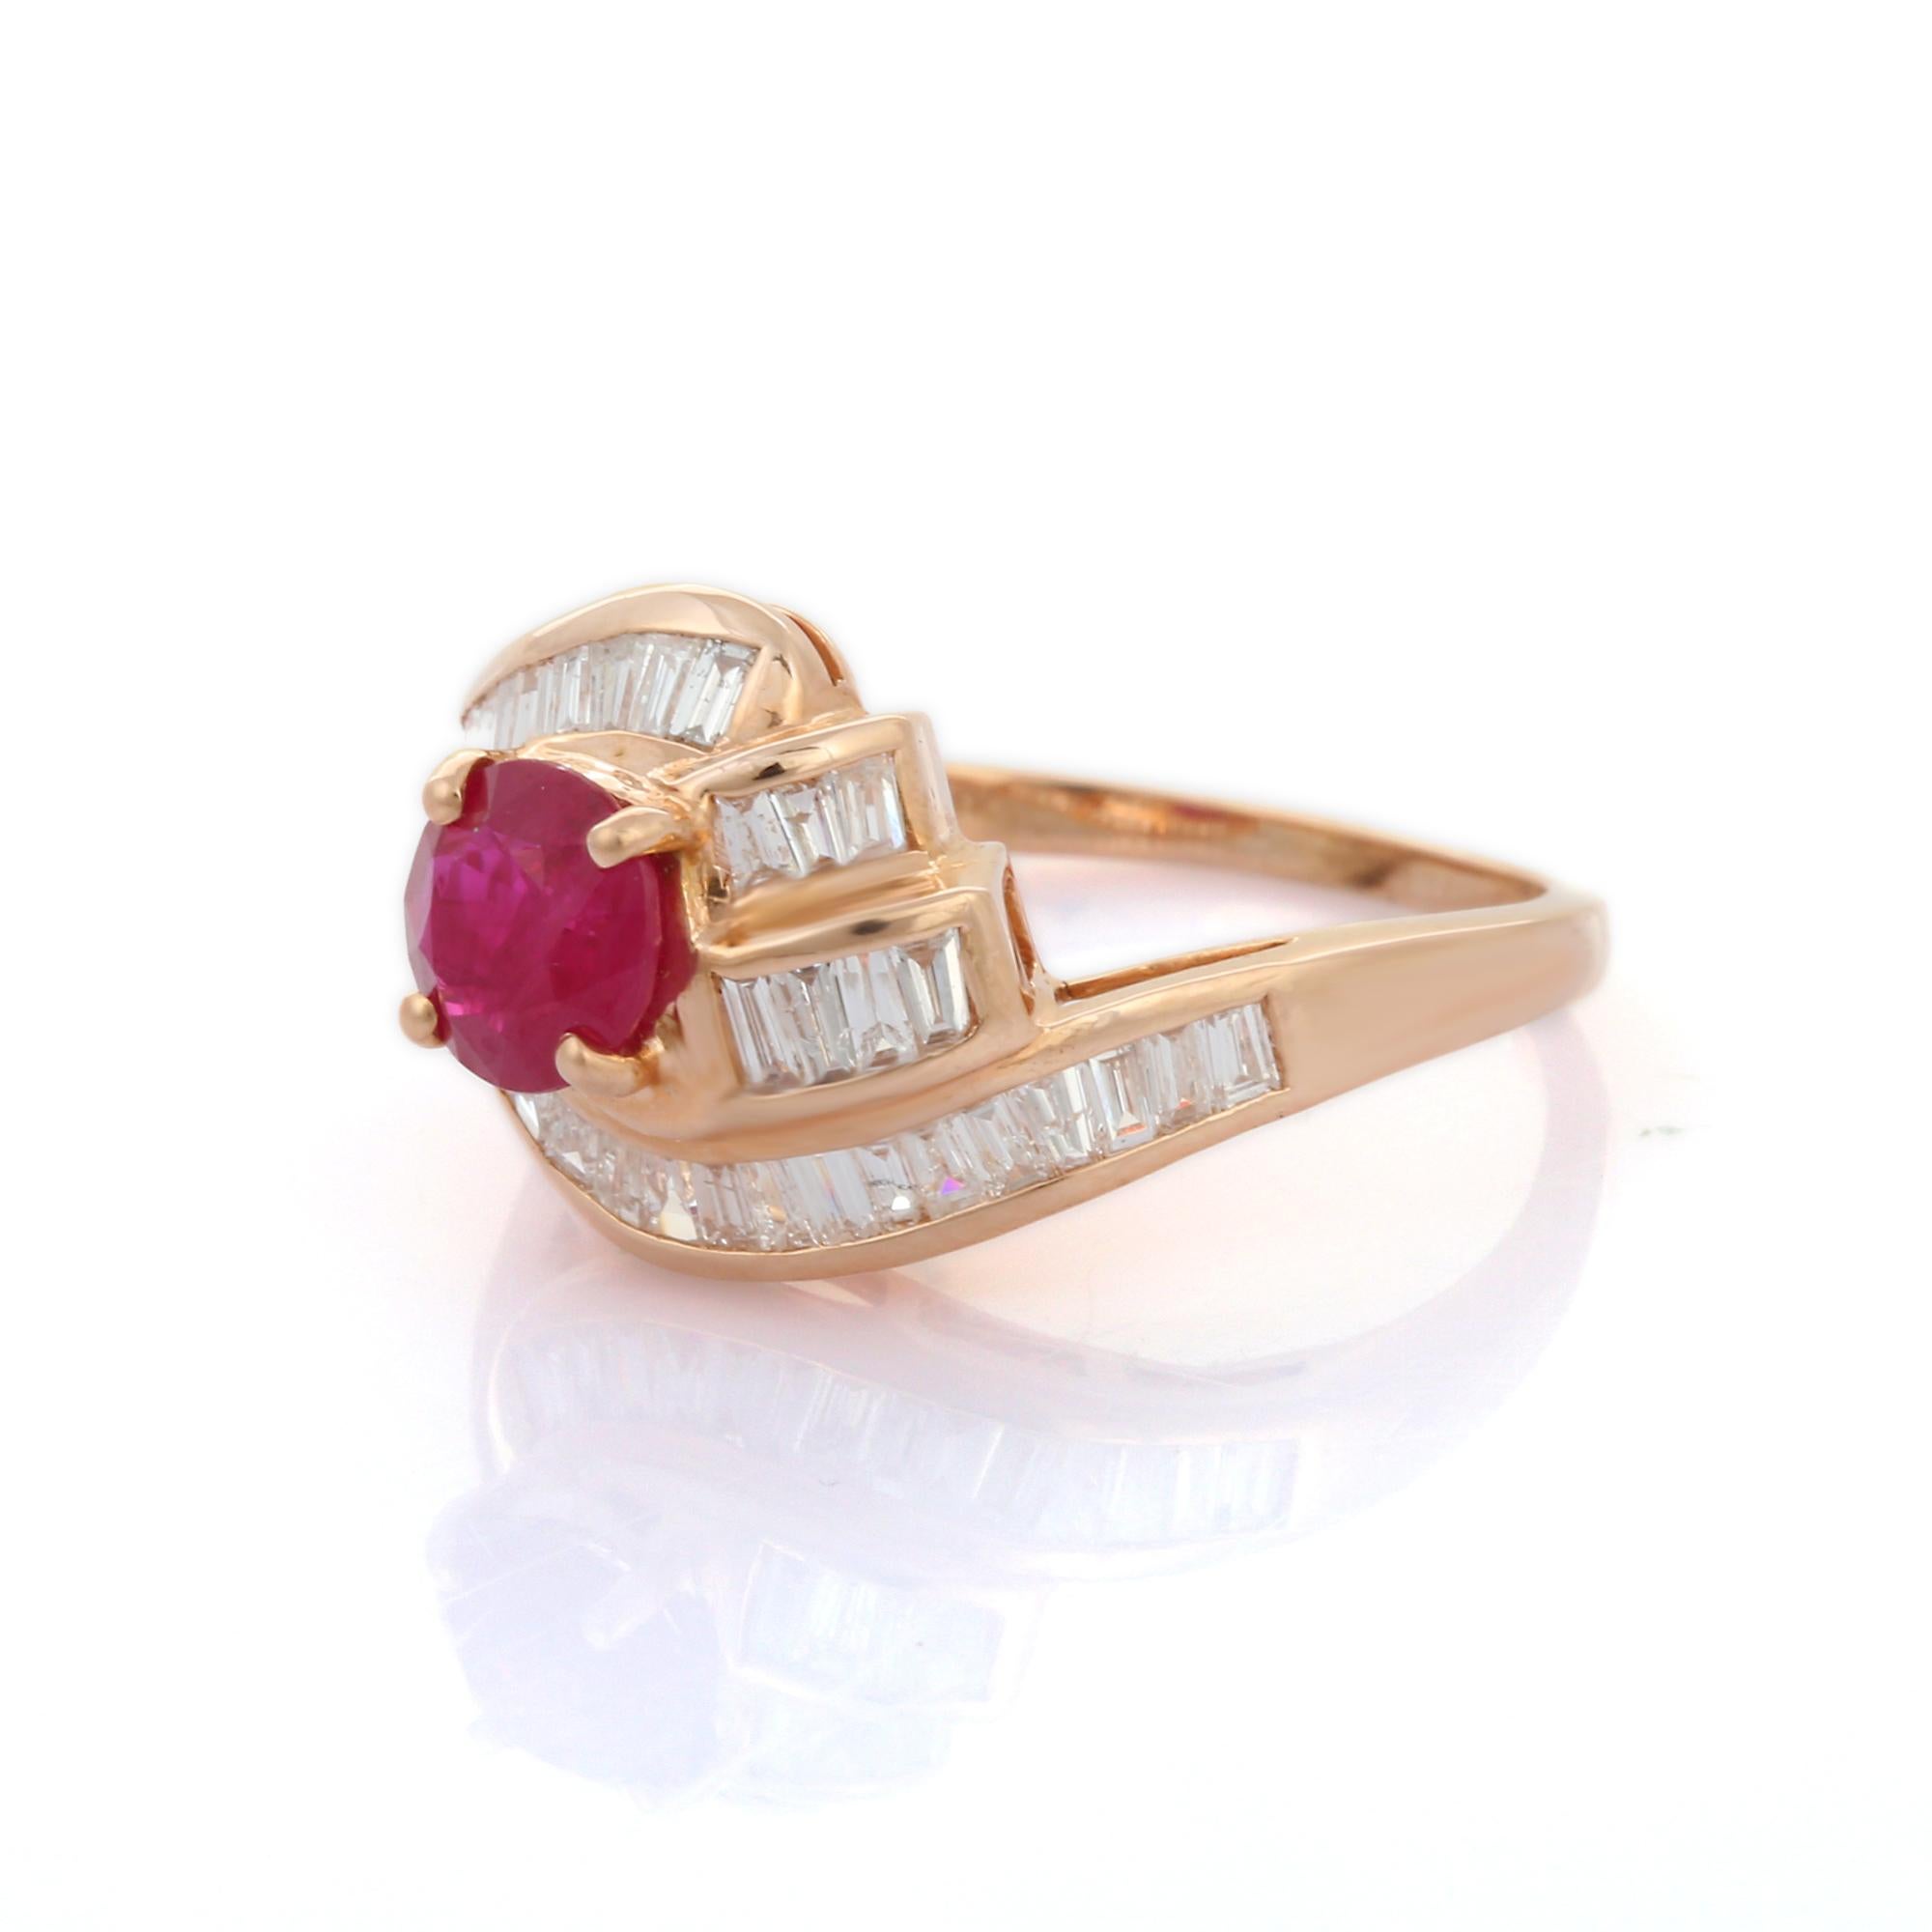 For Sale:  14K Rose Gold Baguette Cut Diamond and Ruby Ring 6